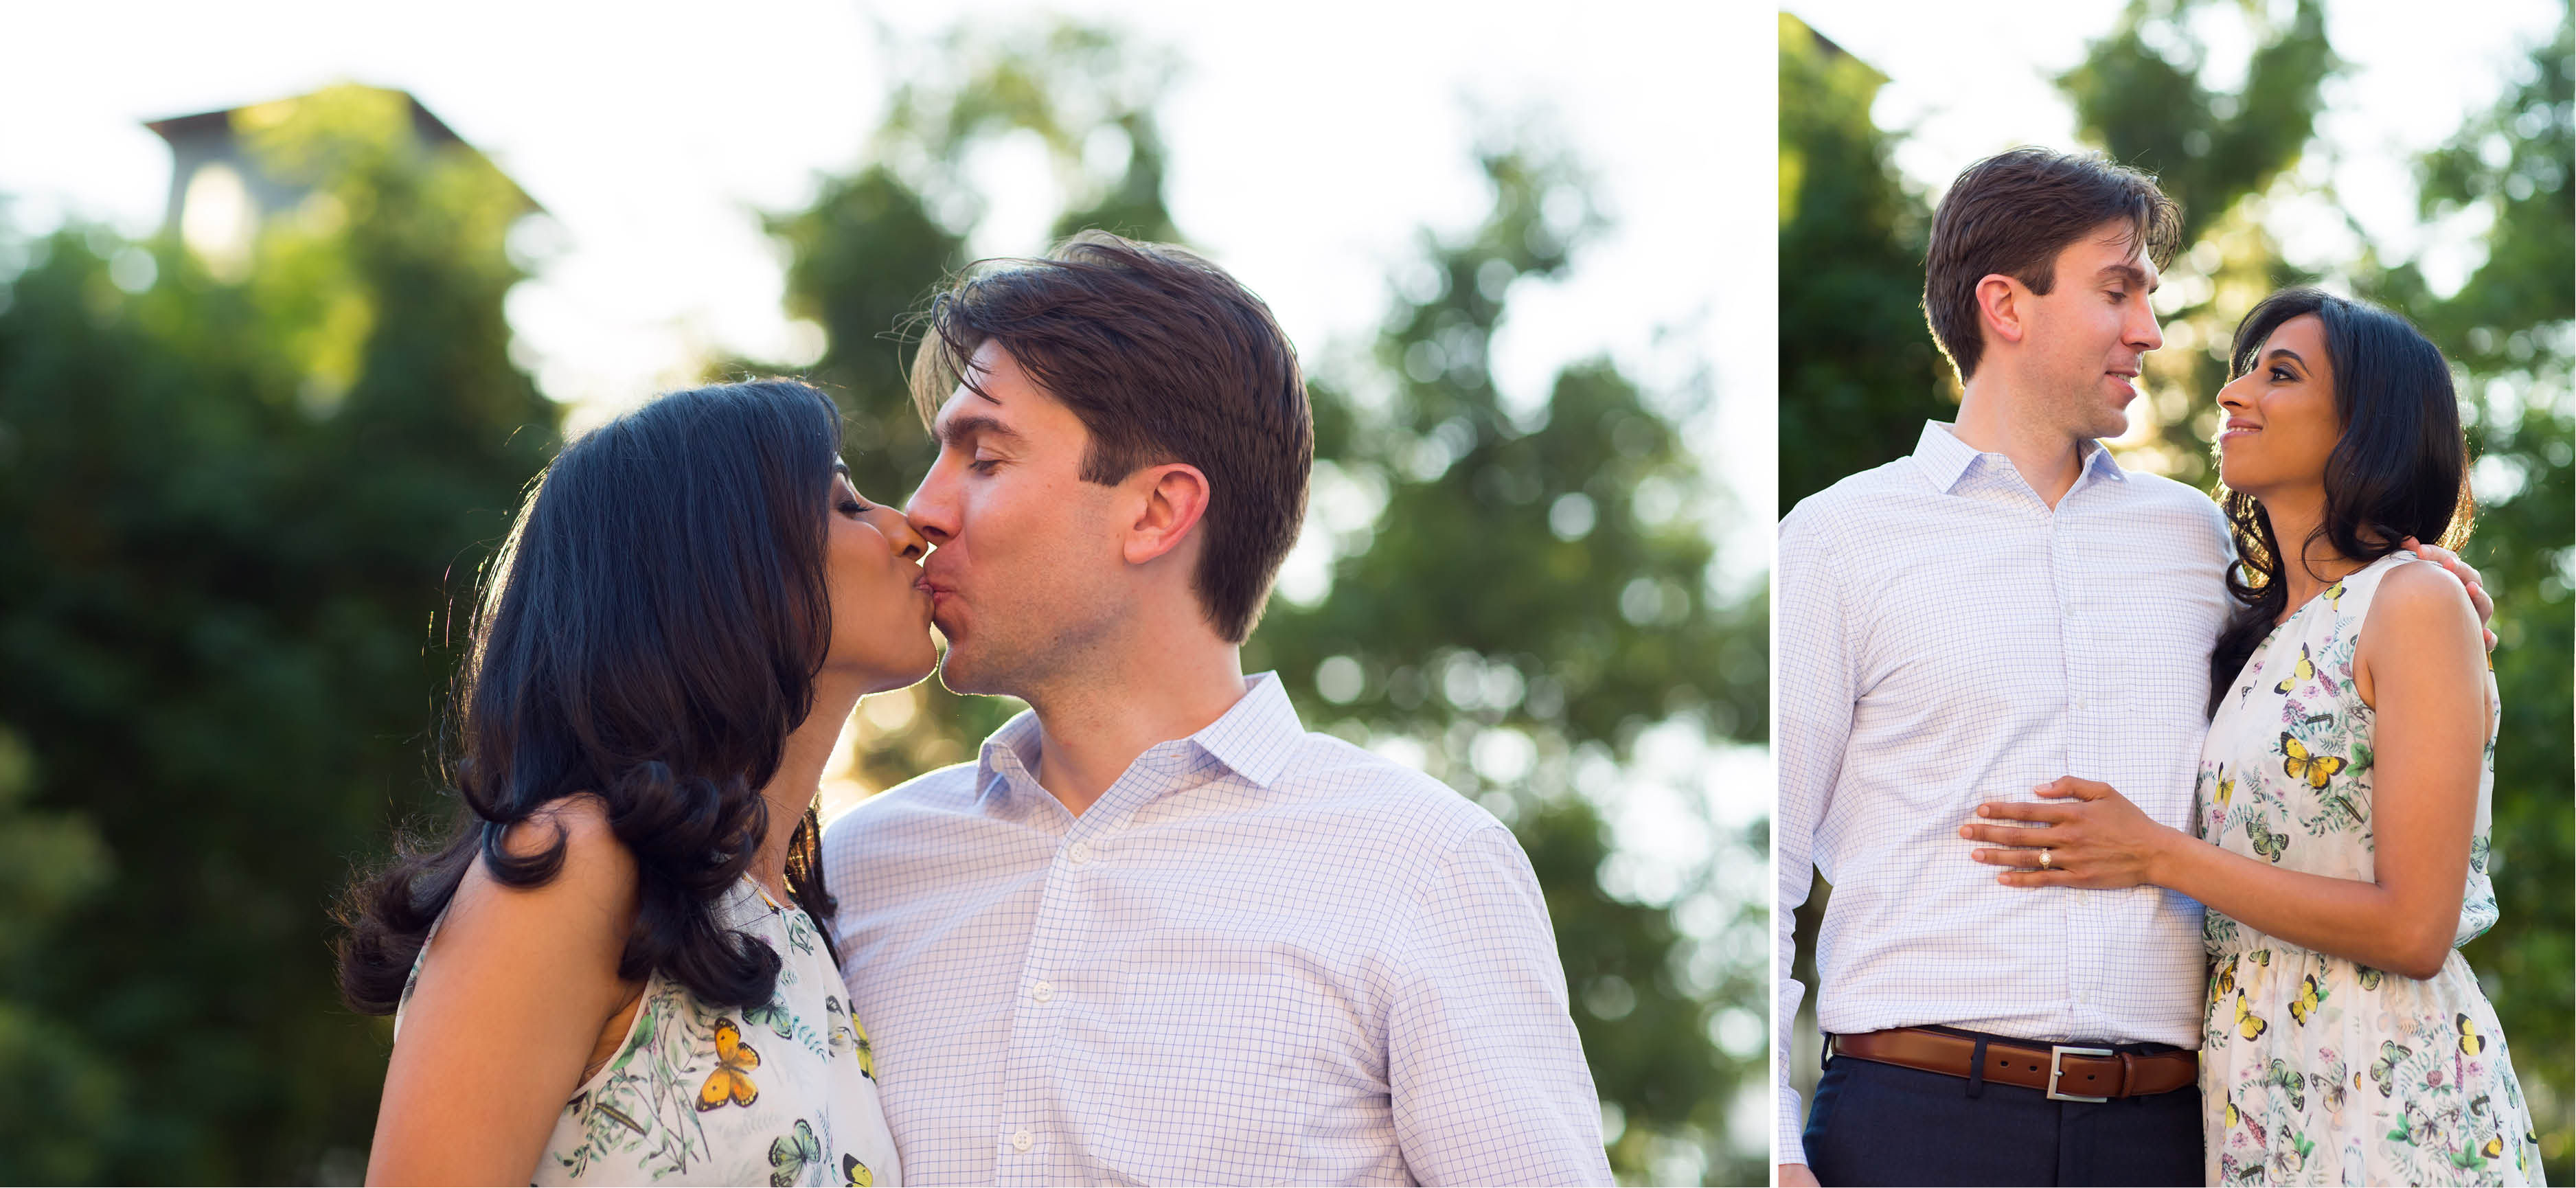 Emma_cleary_photography dumbo engagement2